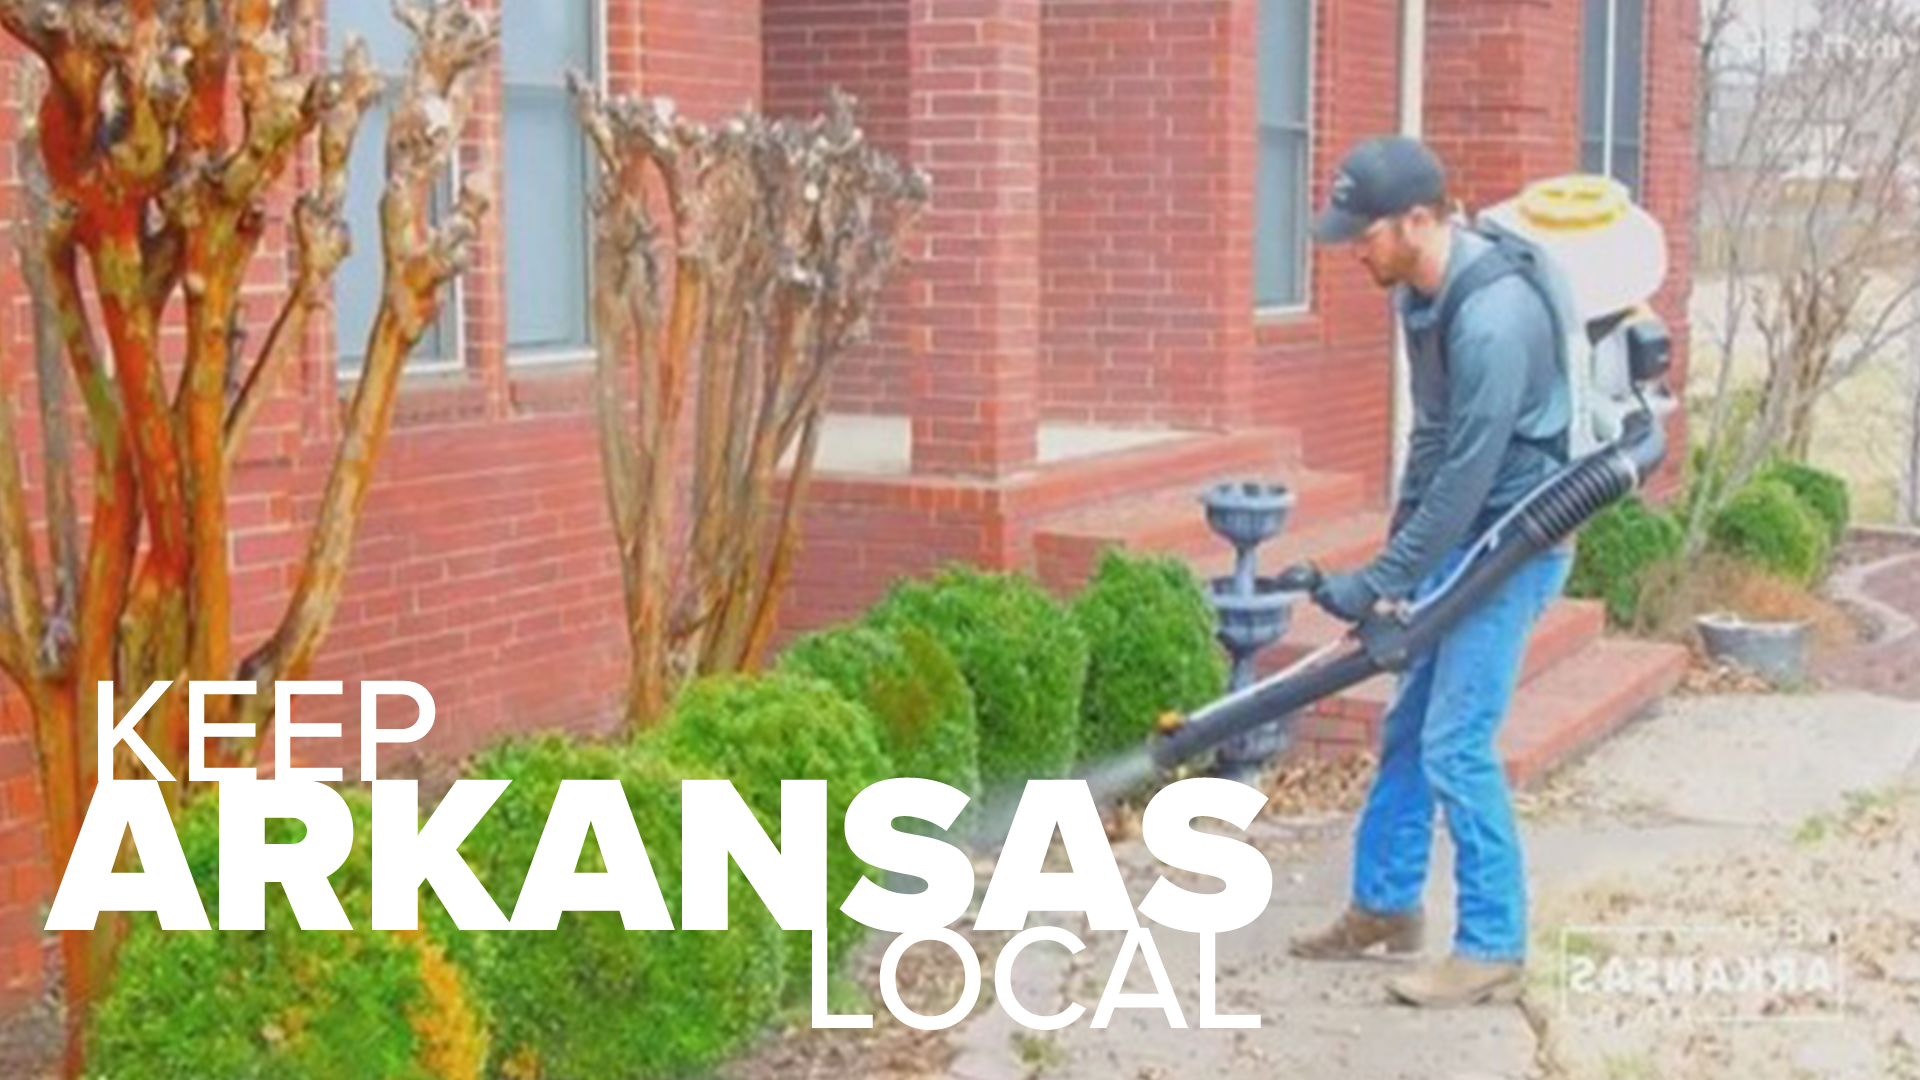 In this week's keep Arkansas local, we're introducing you to a longtime family company, who wants to keep your family safe